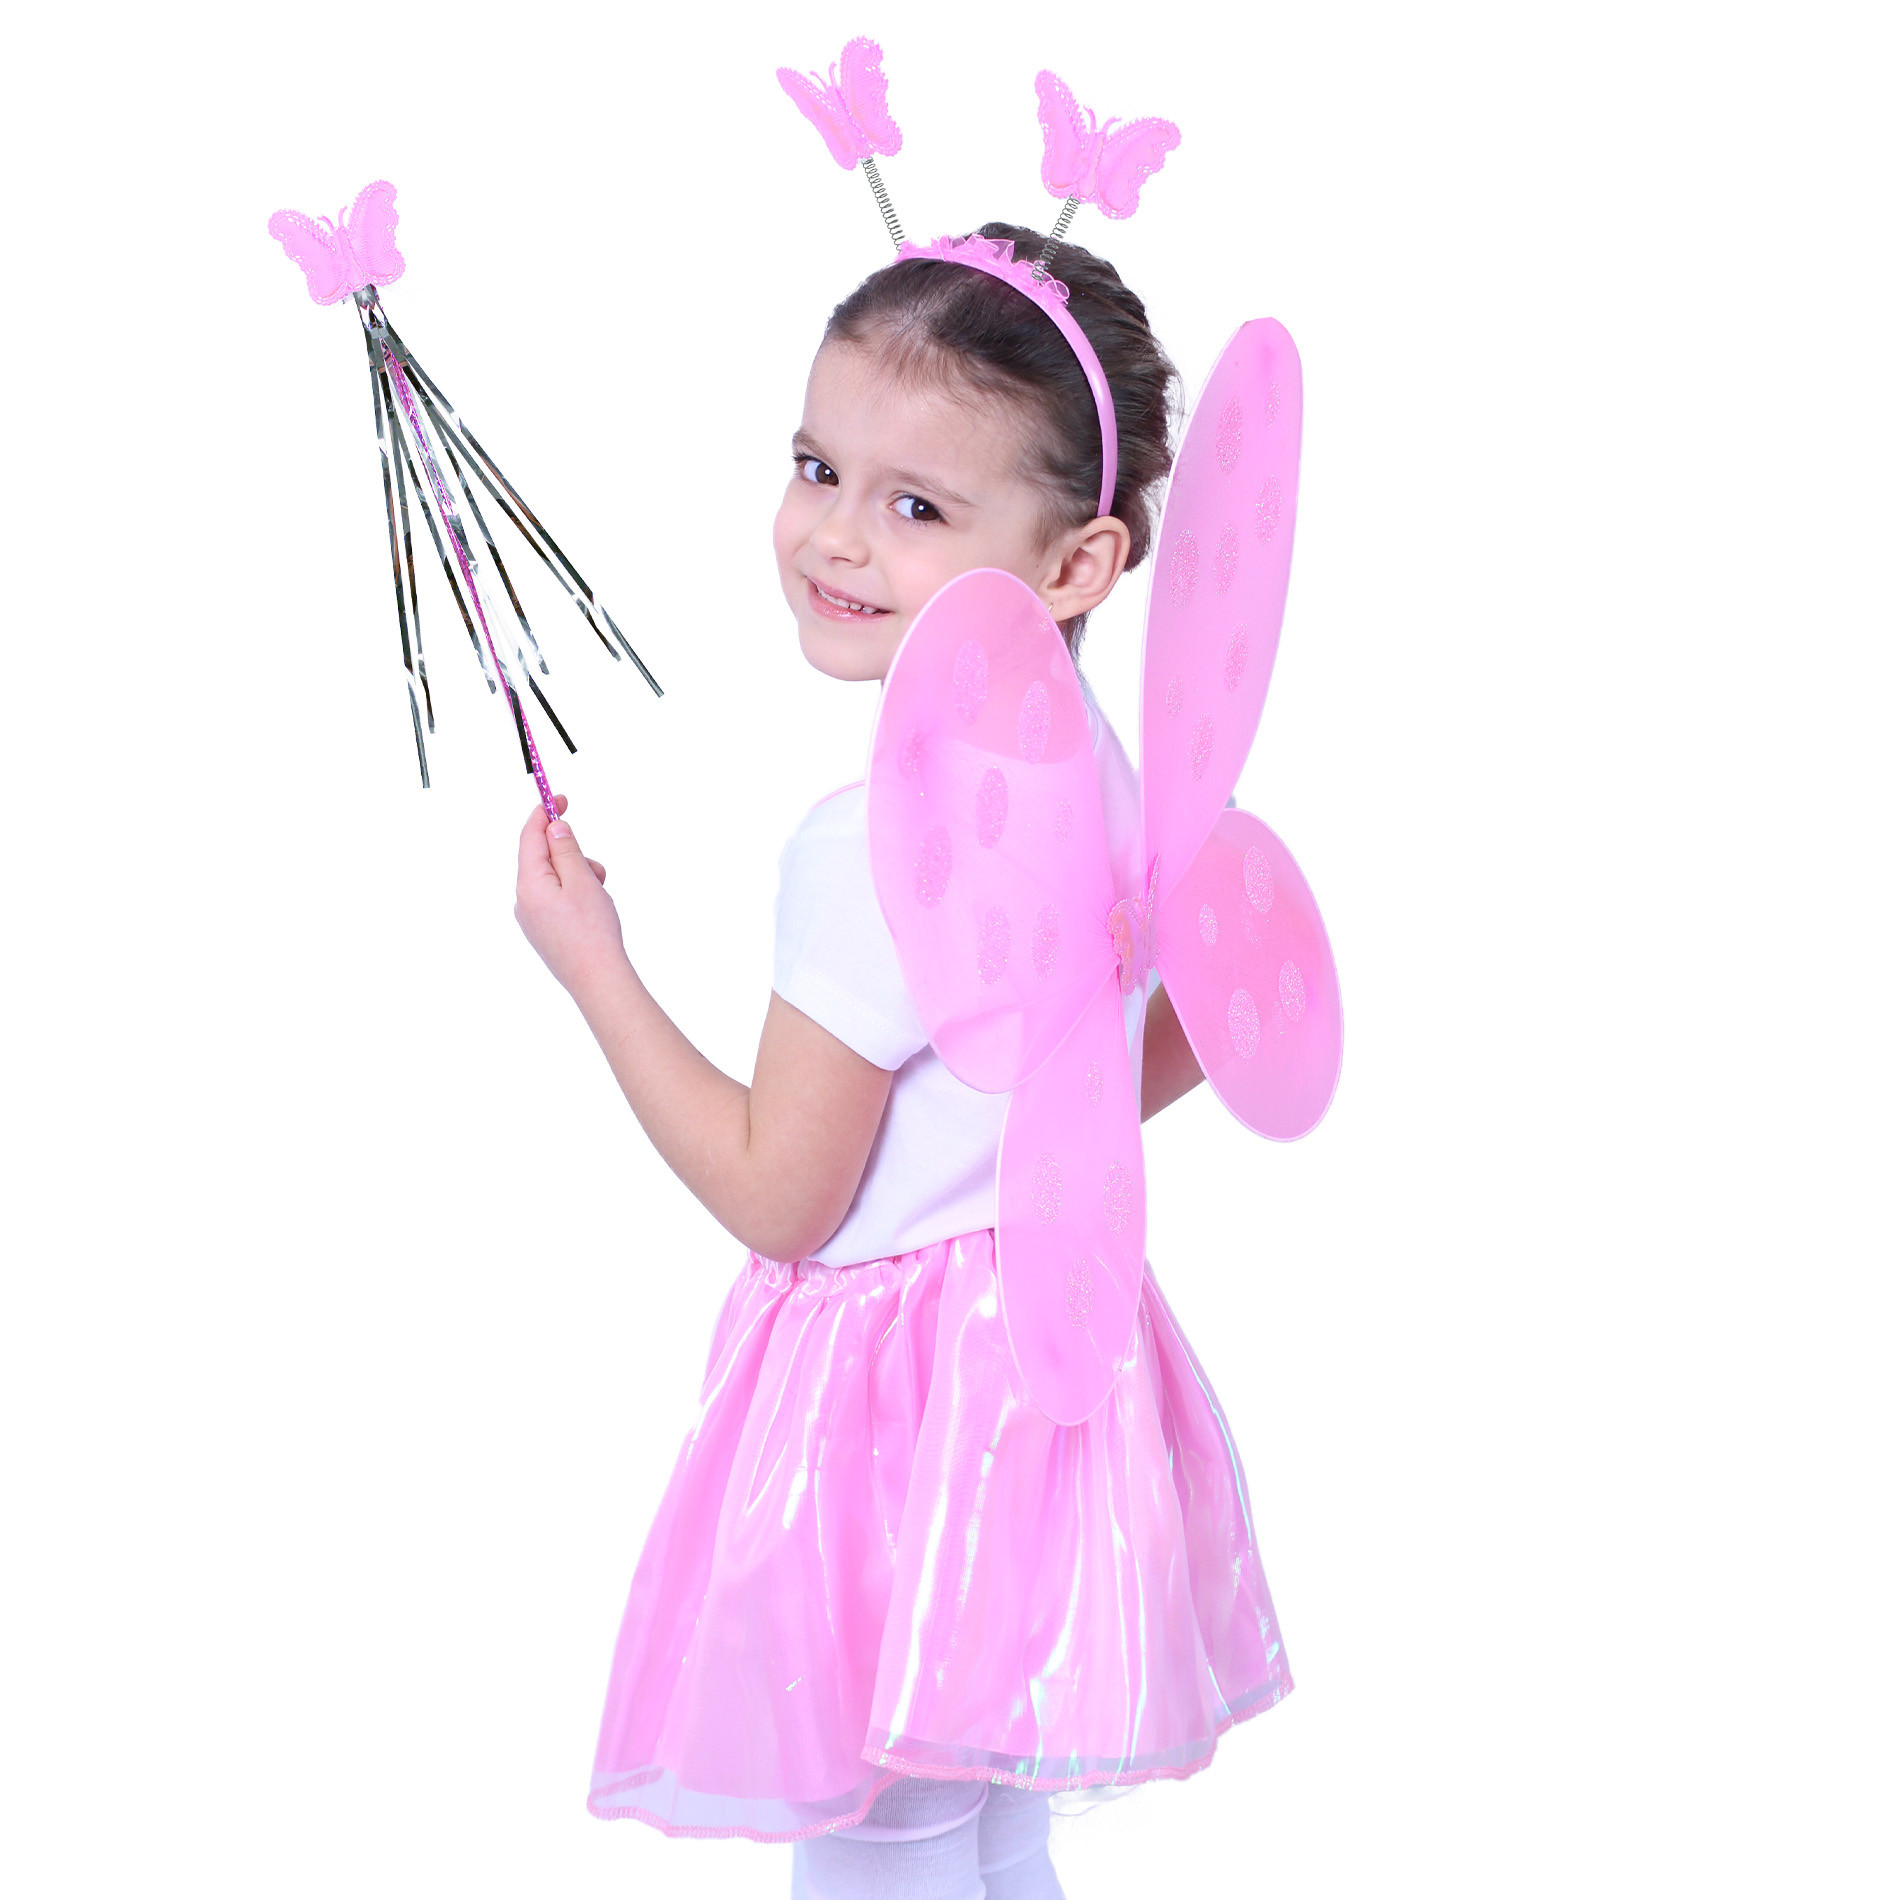 Pink butterfly wings with headband, wand